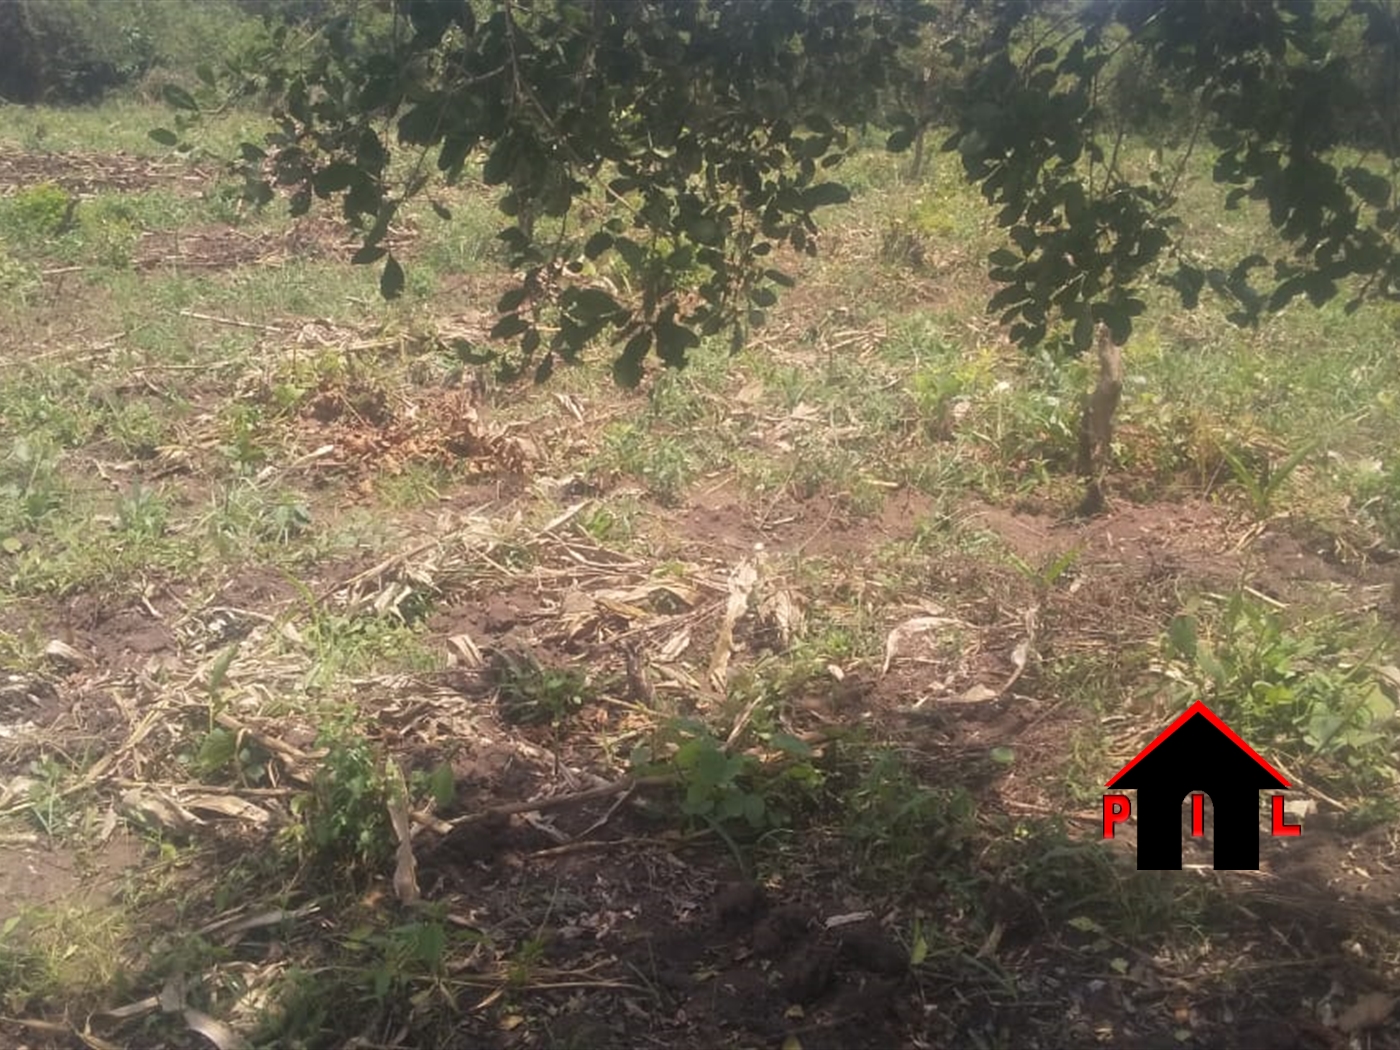 Commercial Land for sale in Rubaare Ntungamo